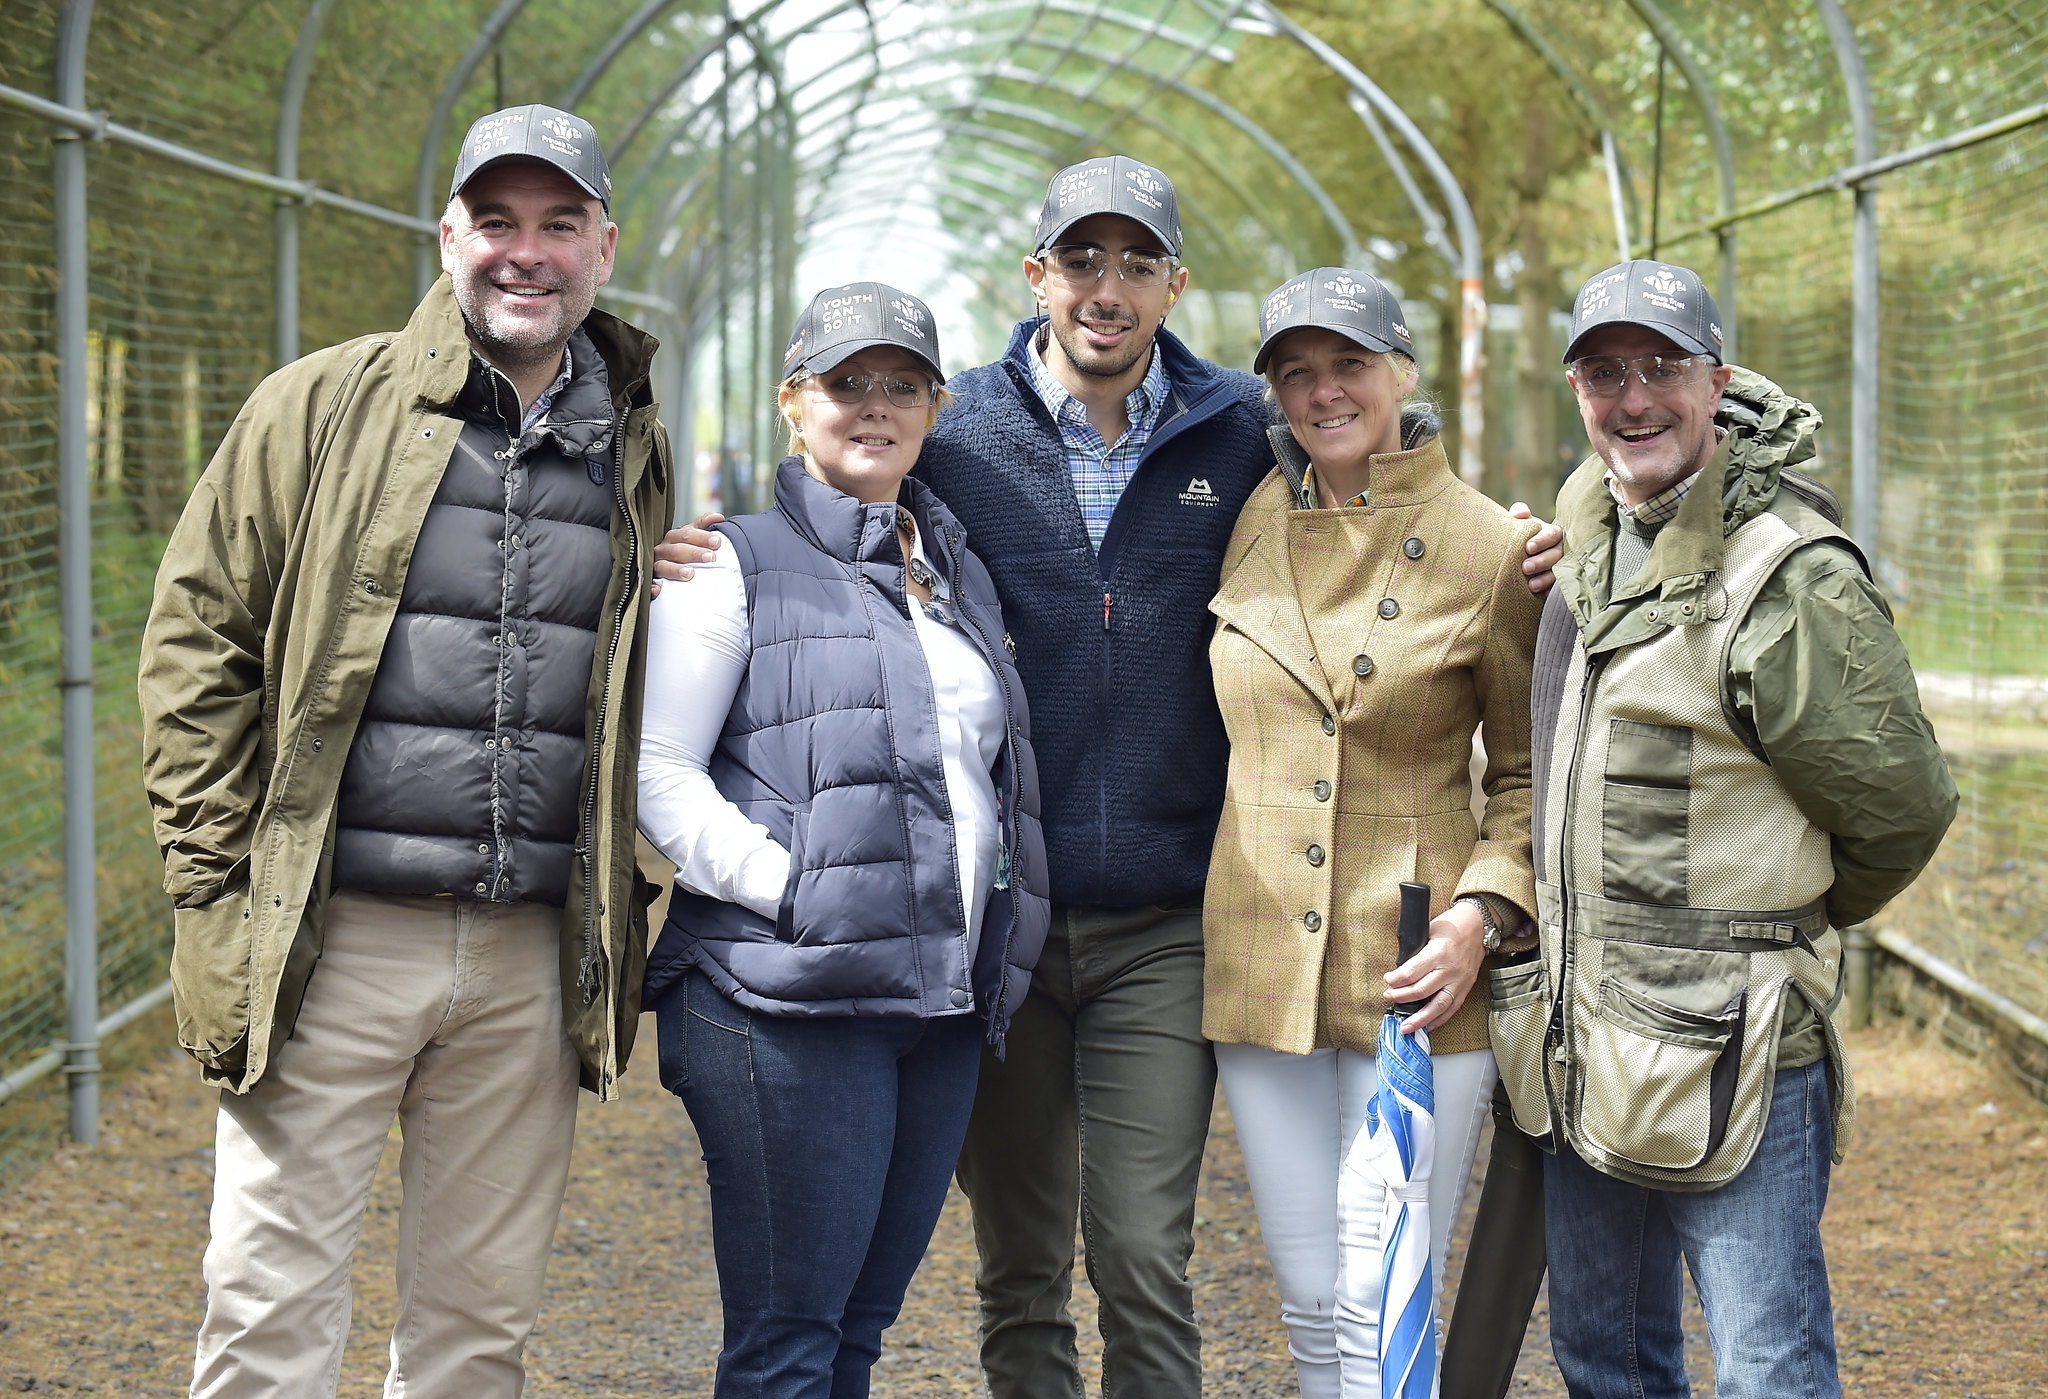 Happy participants at Gleneagles for the Prince's Trust Scotland clay pigeon shoot last year (Photo: Sandy Young)